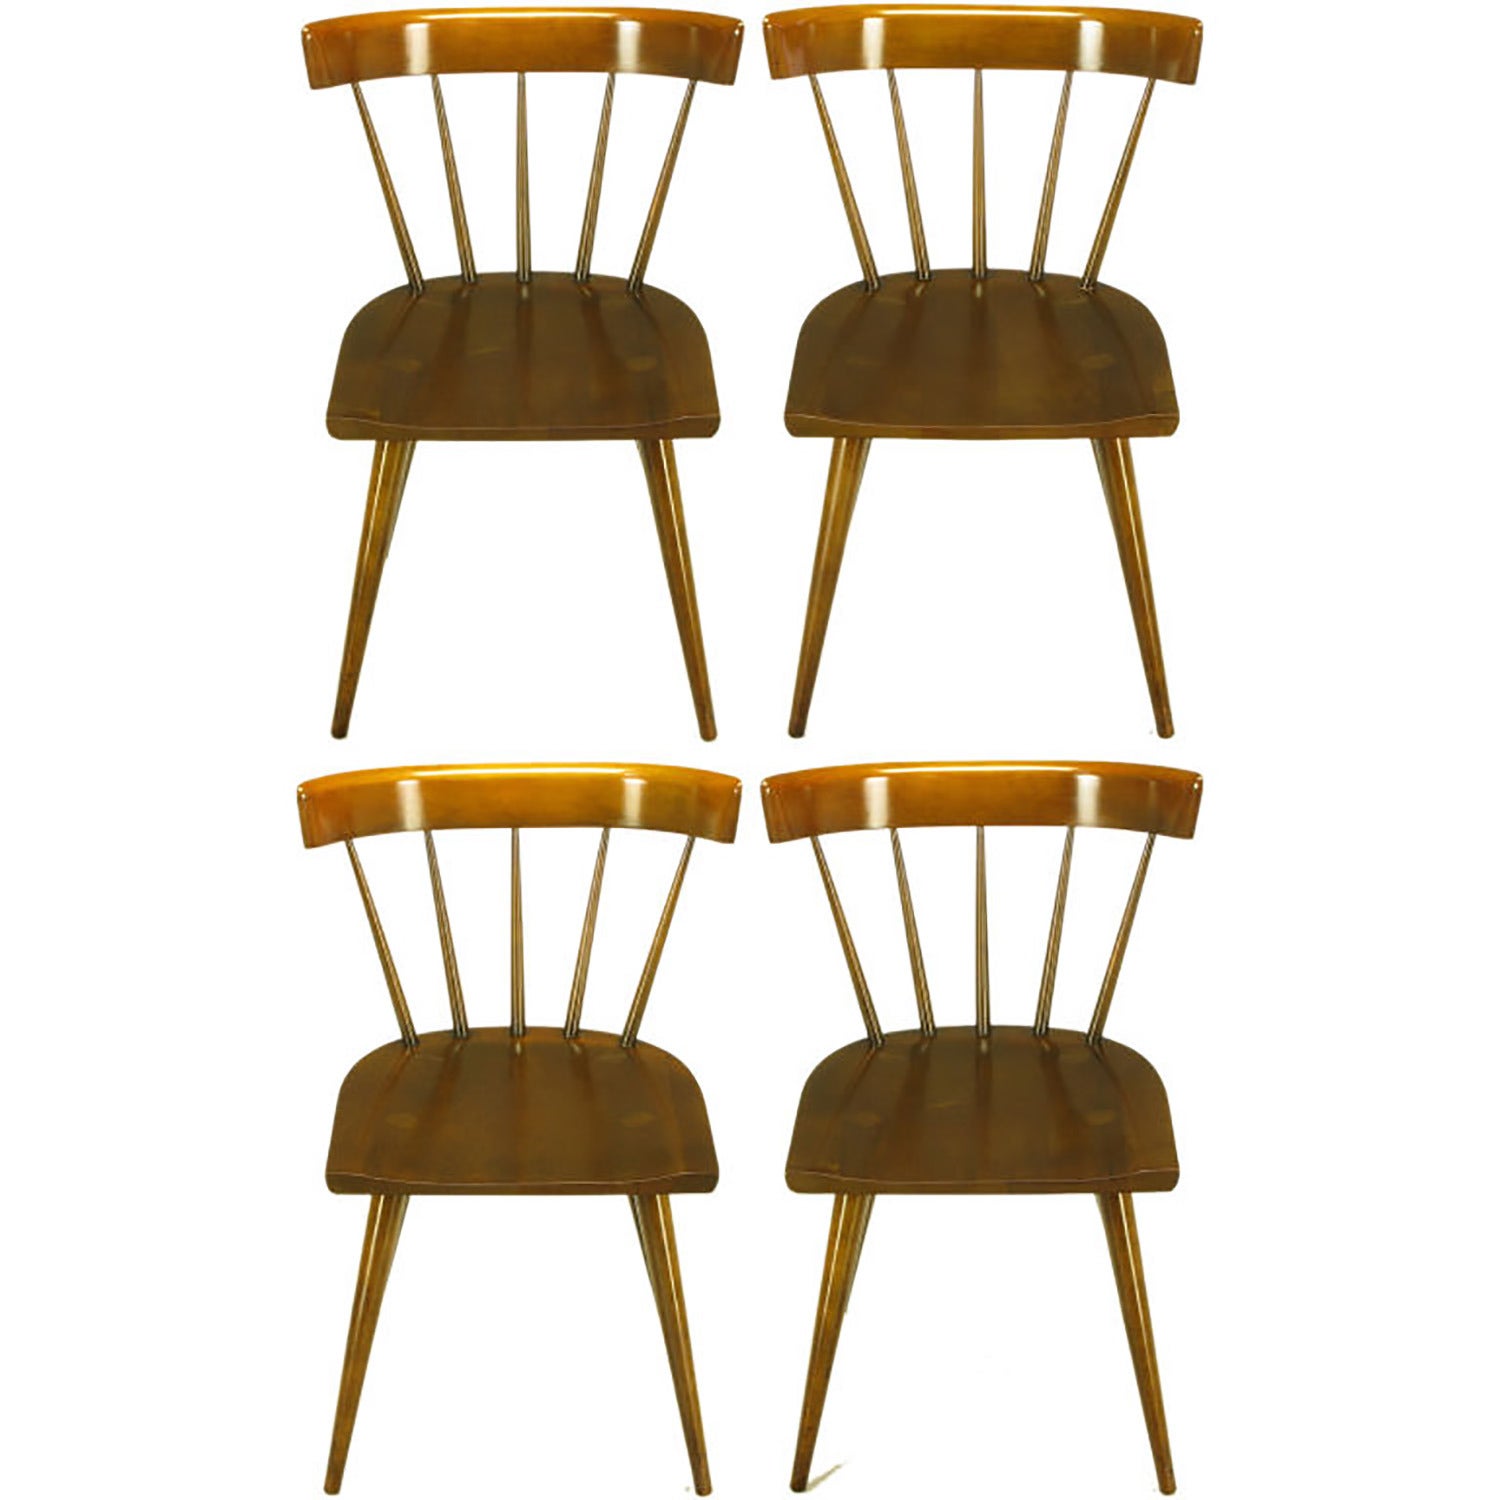 Four Paul McCobb Dark Maple Spindle-Back Dining Chairs